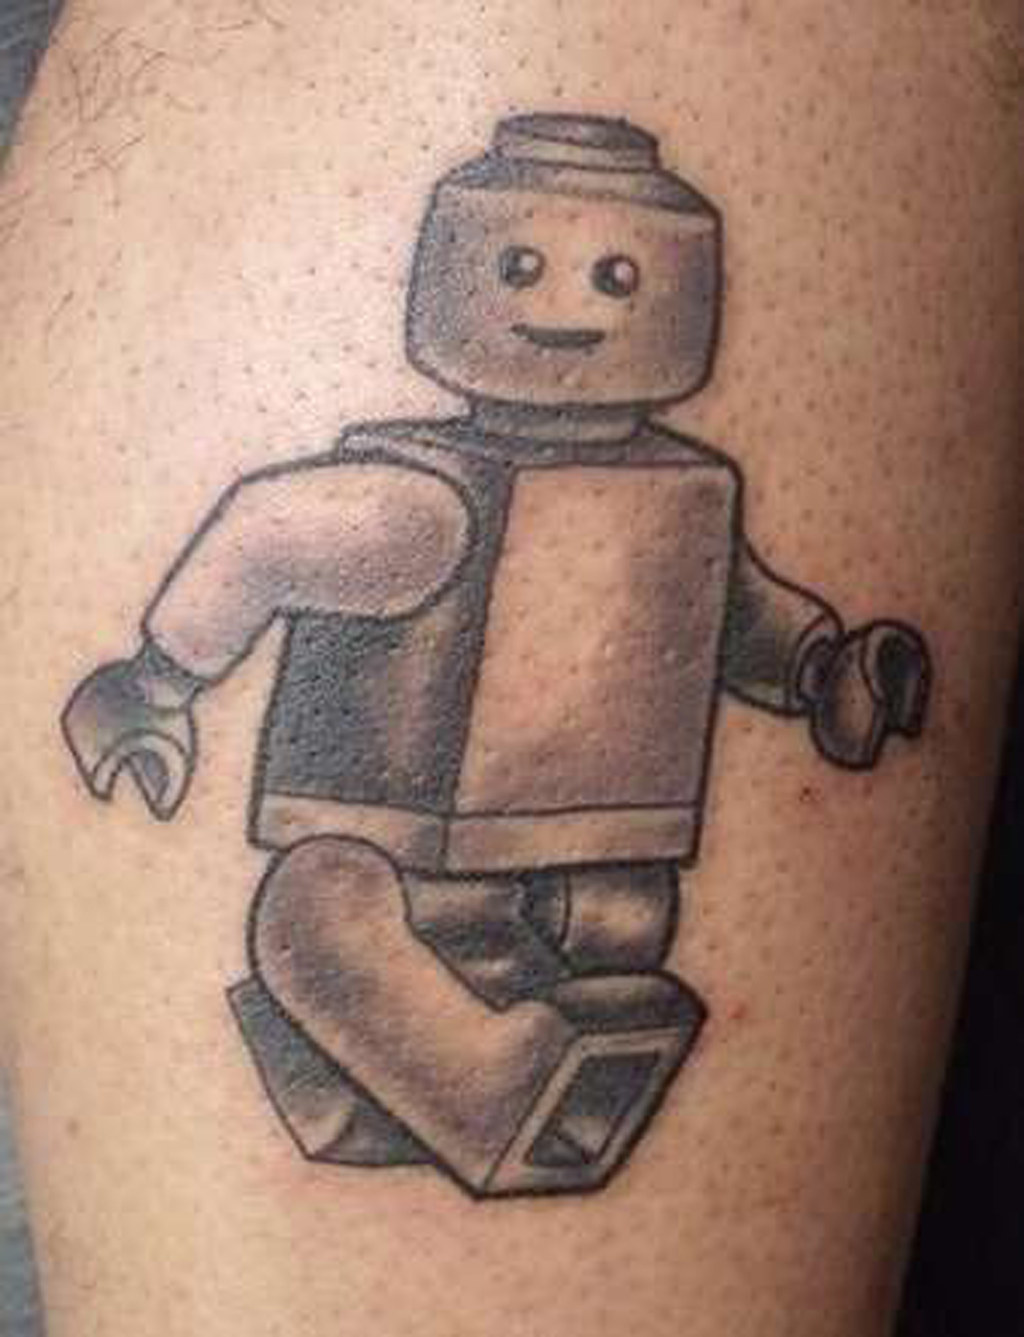 32 Lego Tattoos That Will Thrill Your Inner Child